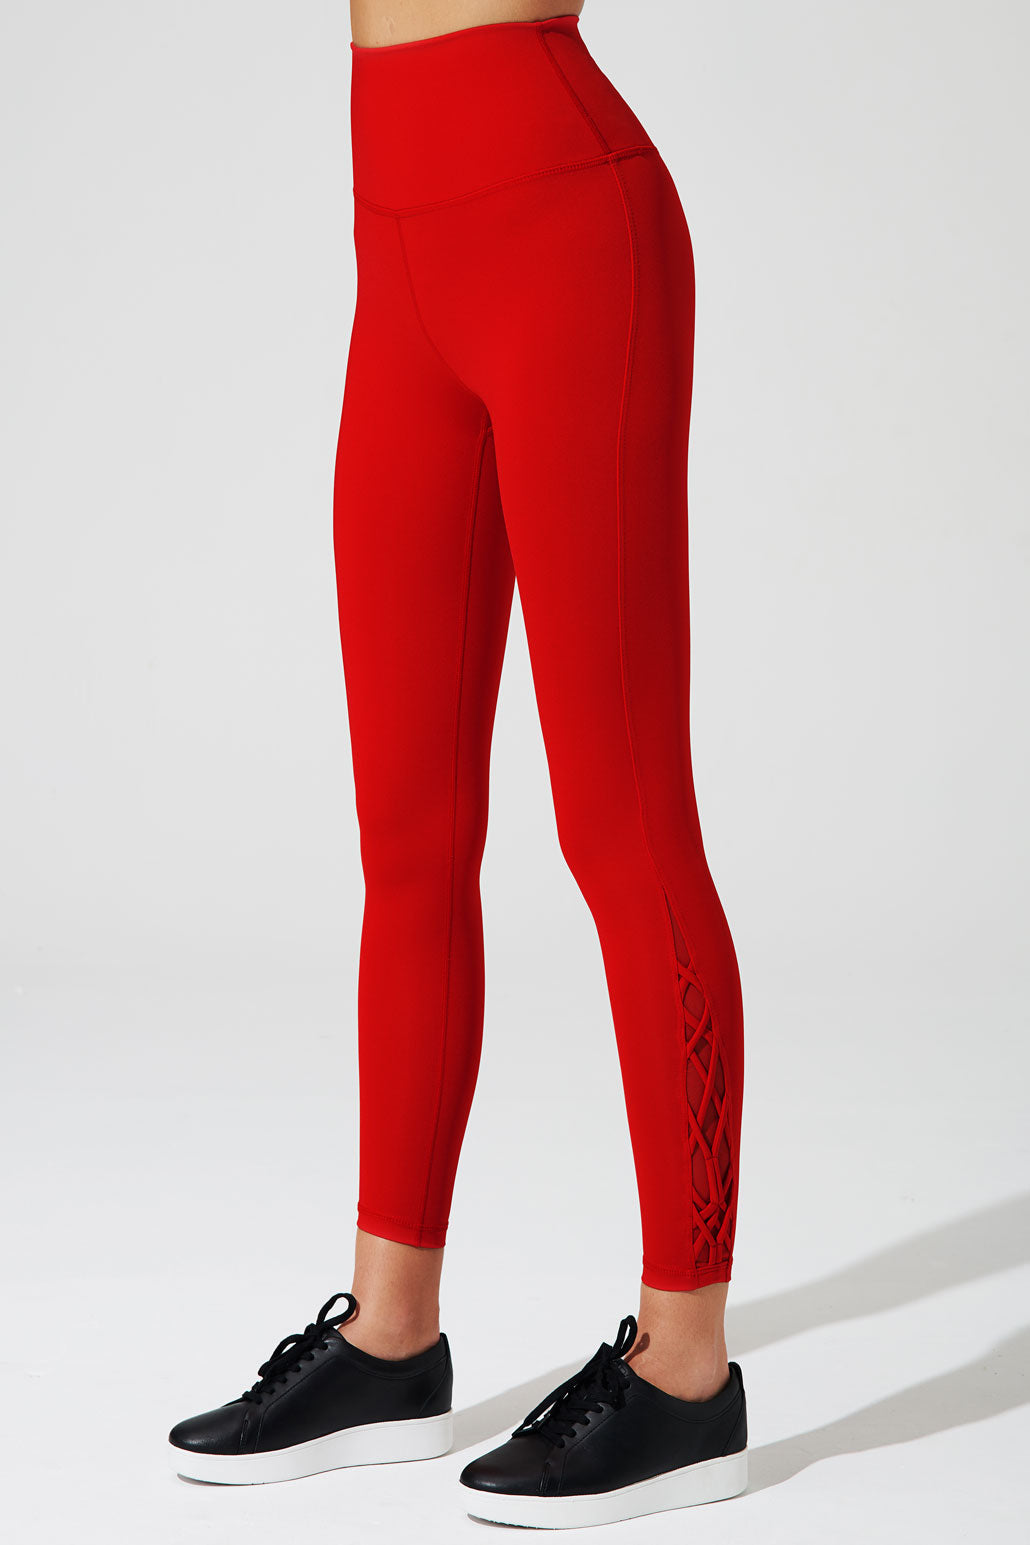 Burgundy red high-waist leggings for women, perfect for a stylish and comfortable look.